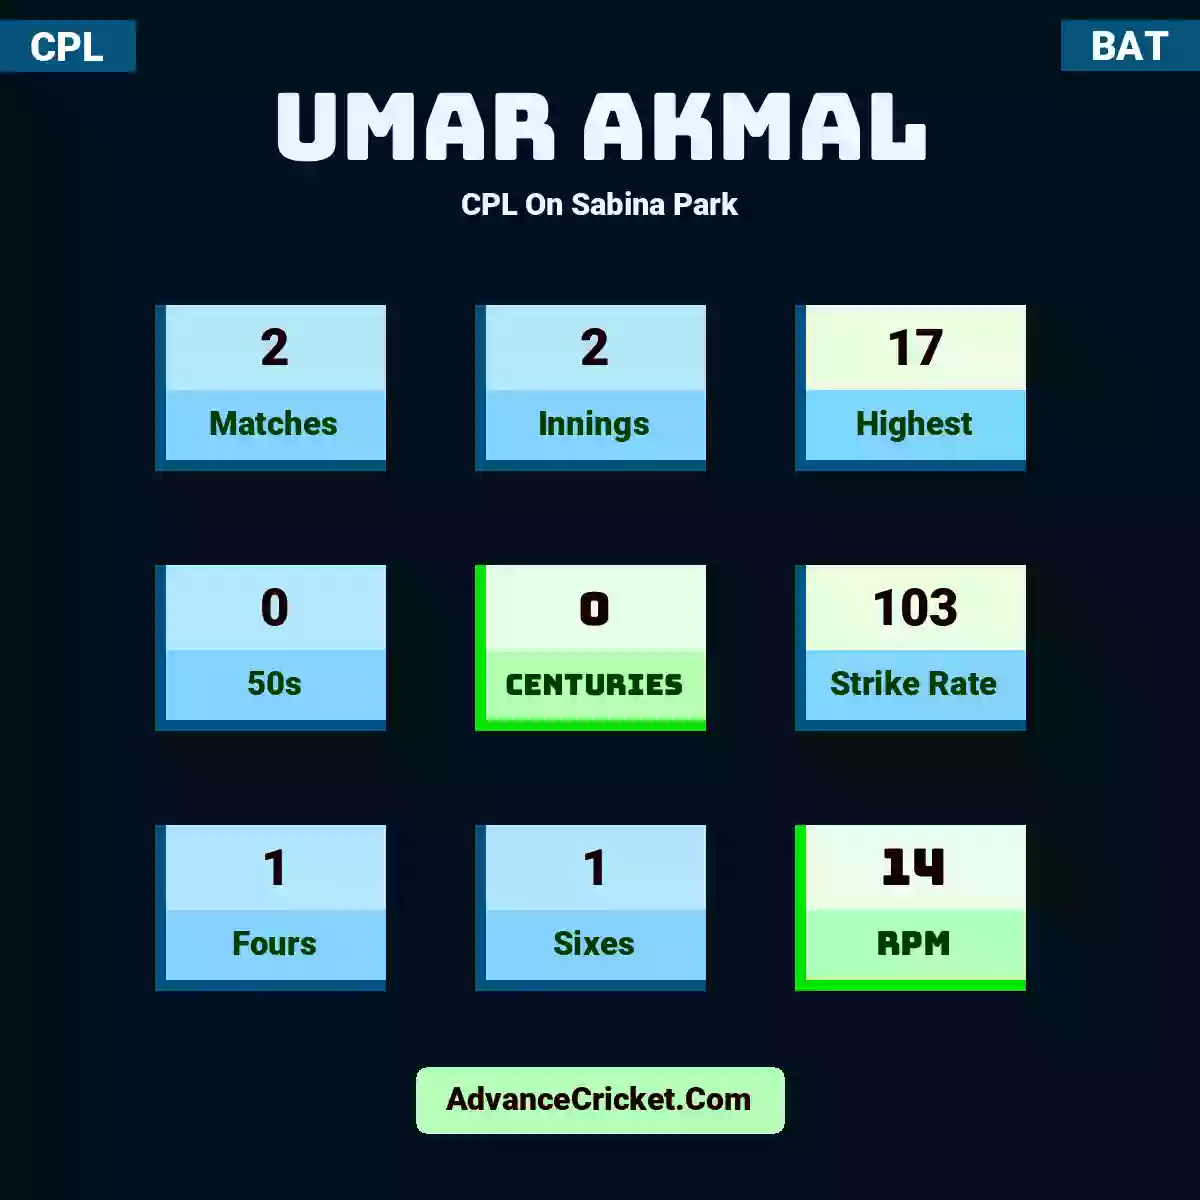 Umar Akmal CPL  On Sabina Park, Umar Akmal played 2 matches, scored 17 runs as highest, 0 half-centuries, and 0 centuries, with a strike rate of 103. U.Akmal hit 1 fours and 1 sixes, with an RPM of 14.